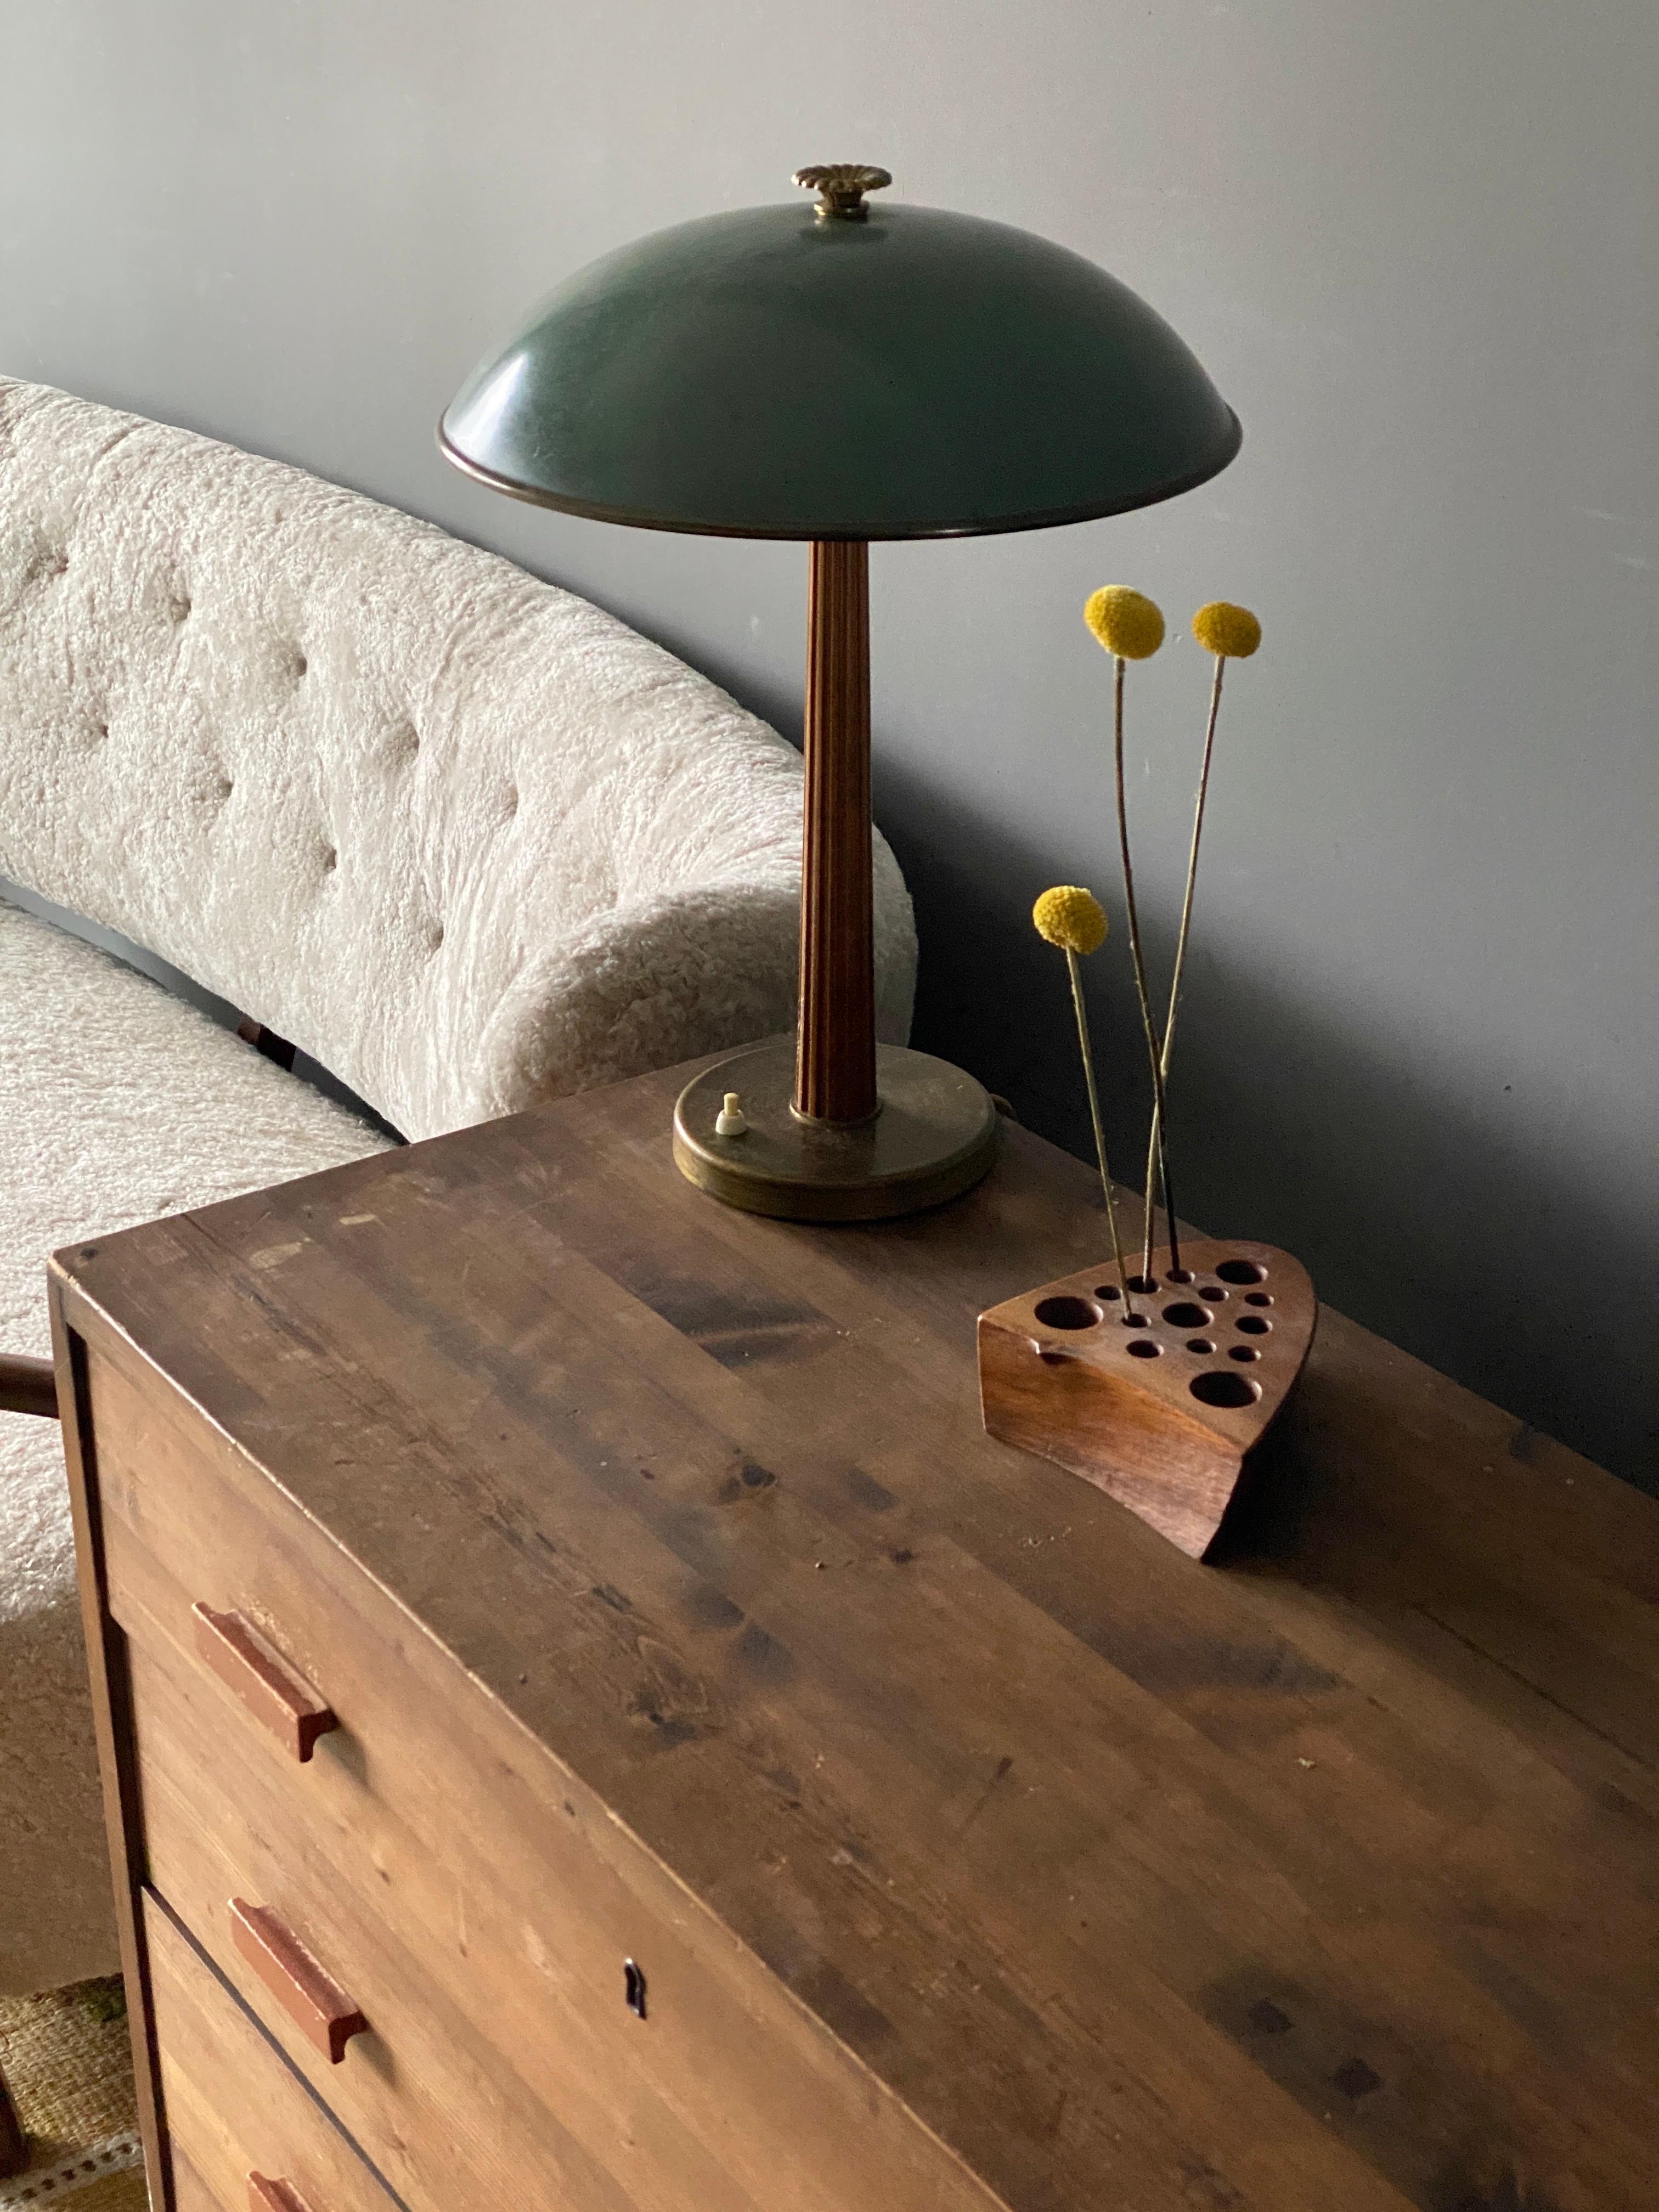 A modernist table lamp or desk light. Produced by the iconic Swedish lamp maker Böhlmarks, circa 1940. Of superb quality. 

Features a finely sculpted lacquered wood handle on a brass rod and base, original lacquered metal screen.

Other